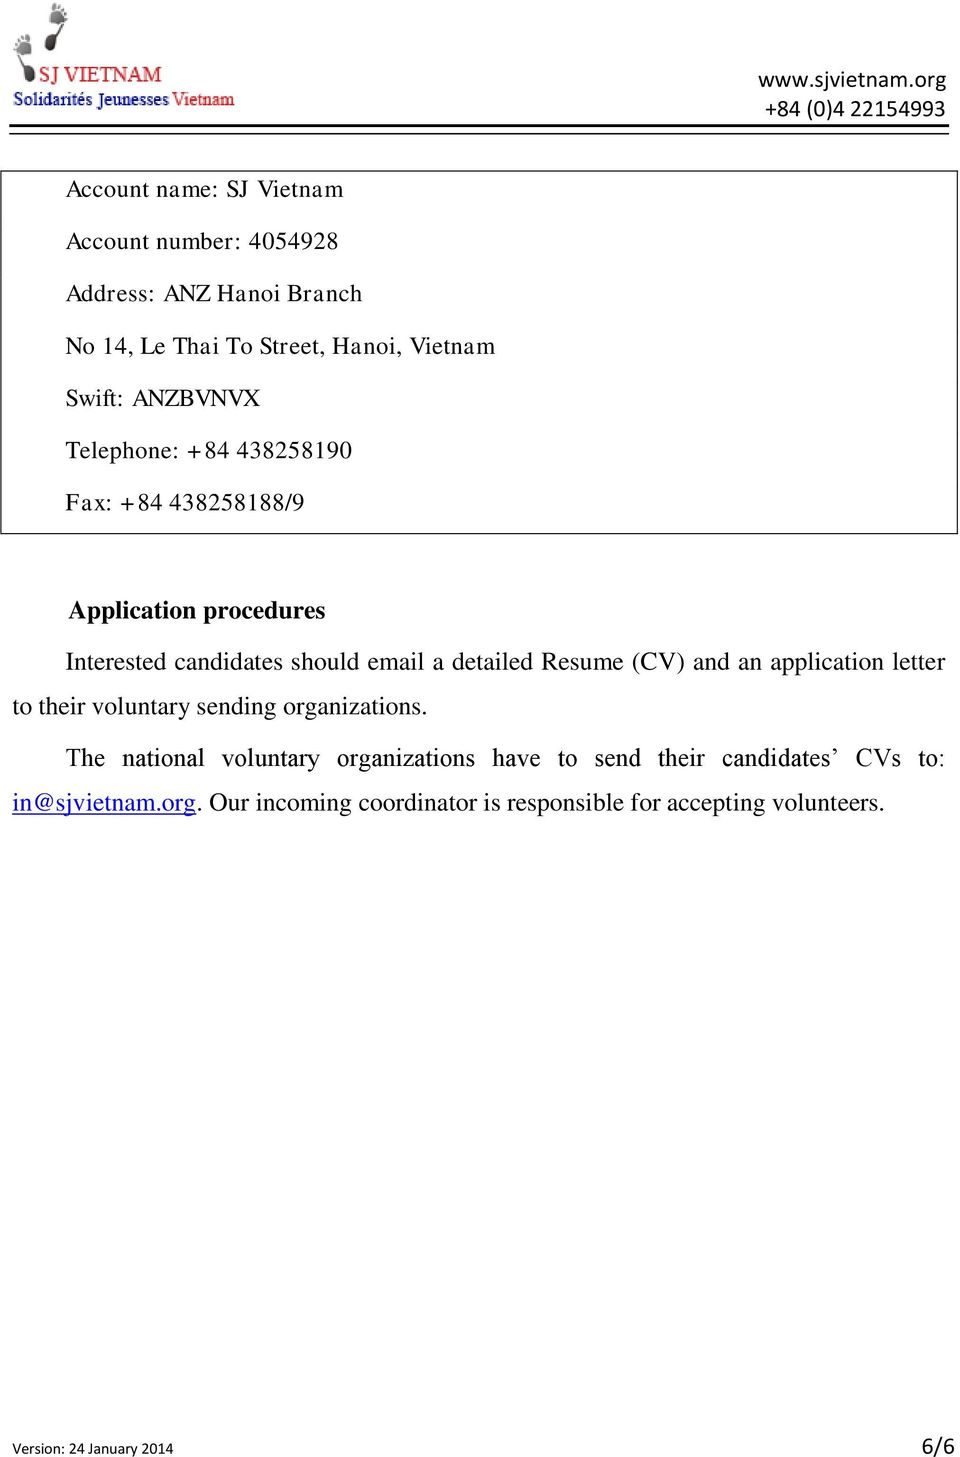 Resume (CV) and an application letter to their voluntary sending organizations.